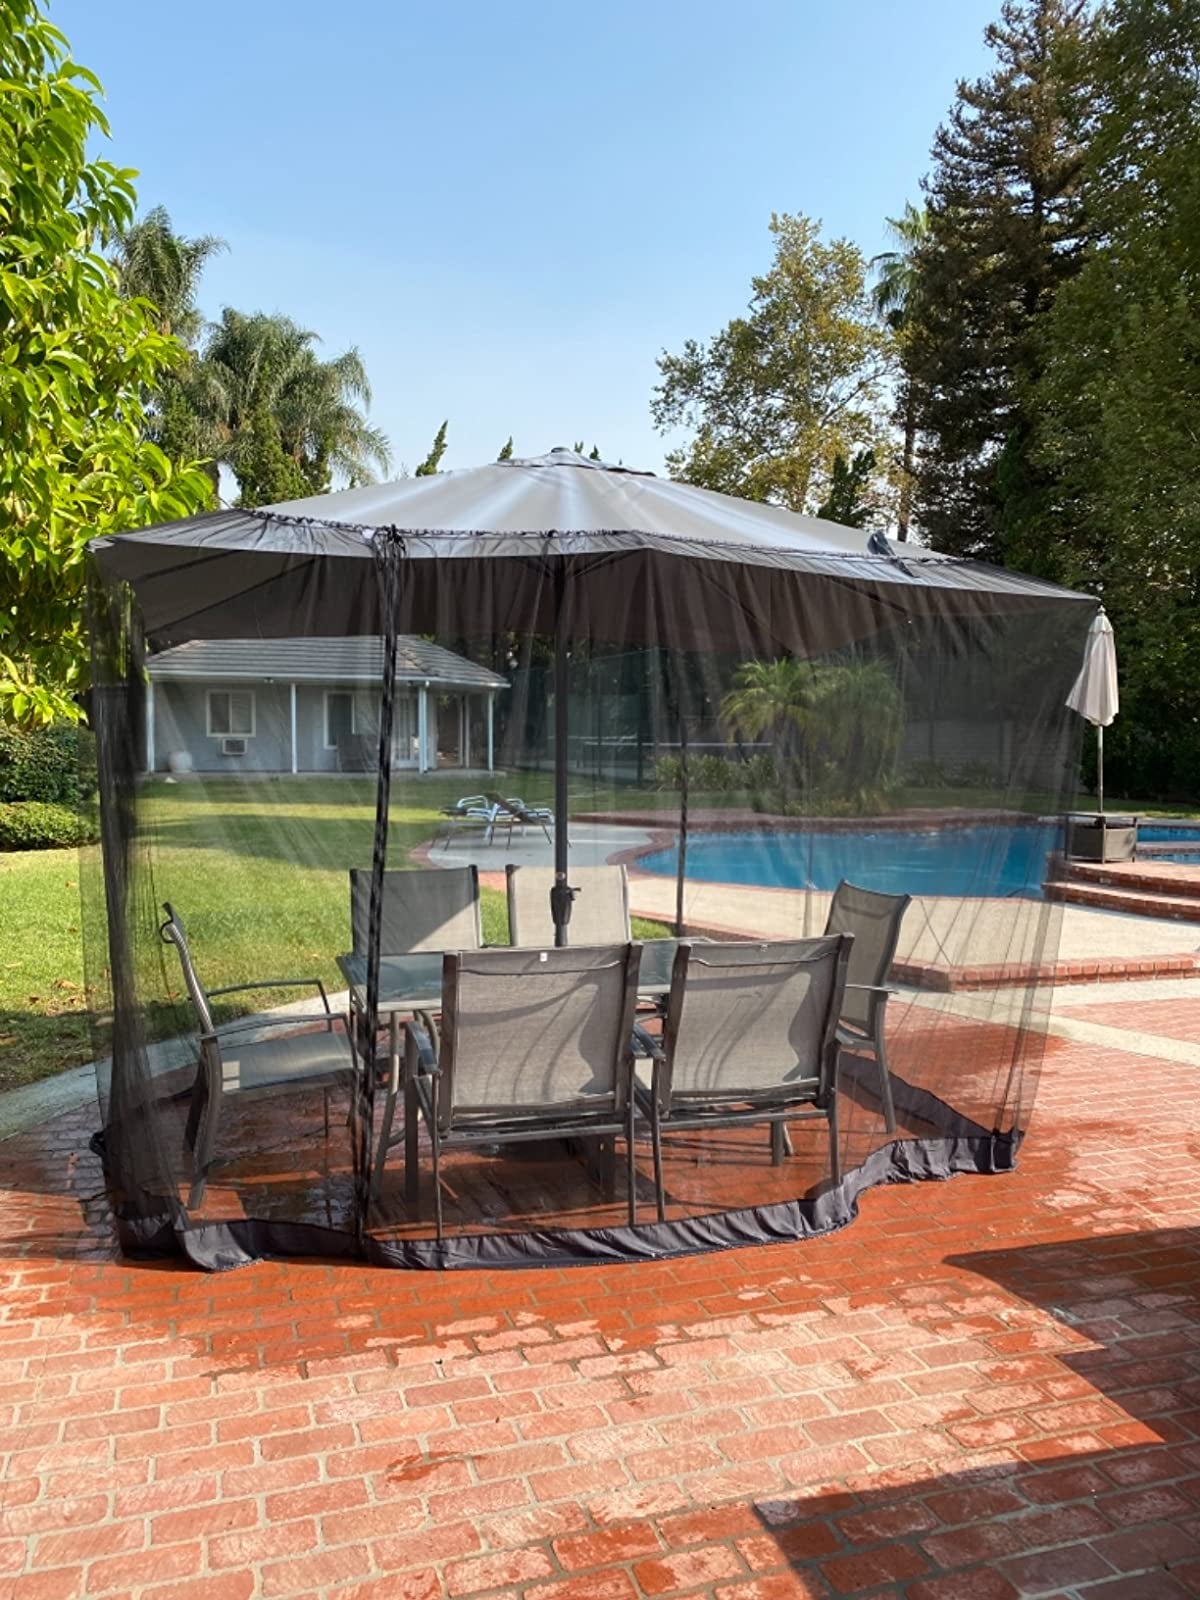 reviewer image of the netting over a patio furniture set outdoors